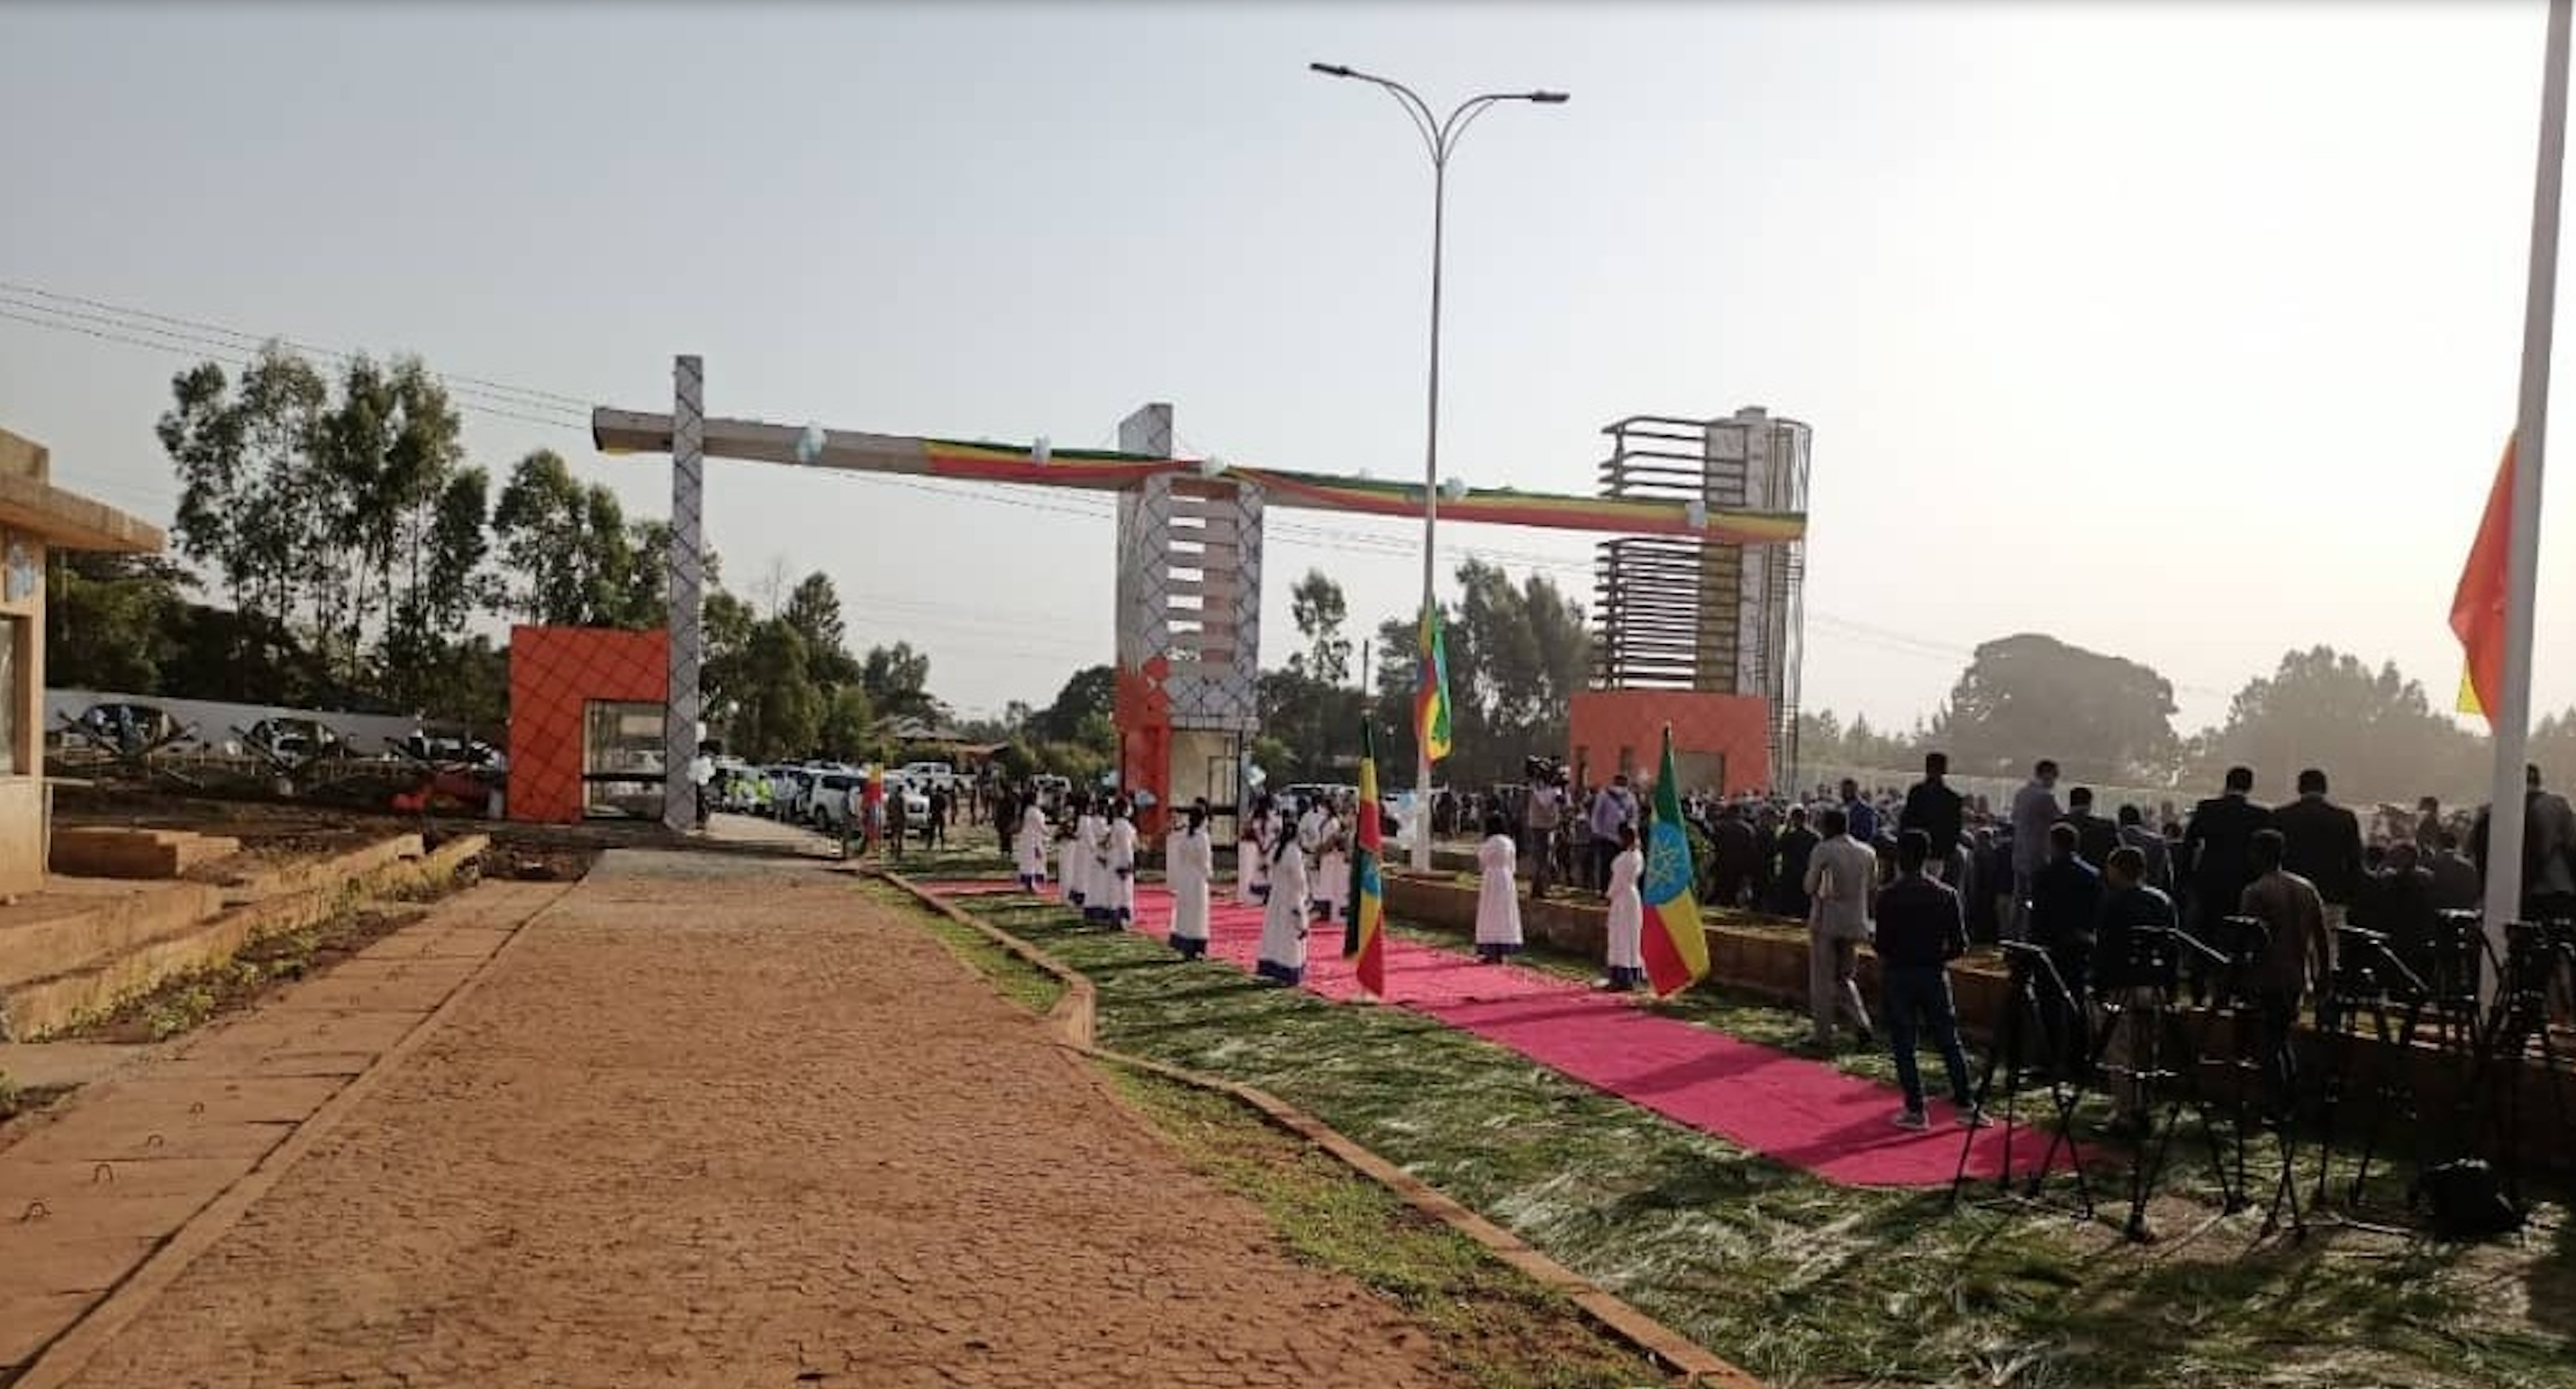 Ethiopia: Prime Minister Abiy Ahmed inaugurates Bure Integrated Agro-Industrial Park in Amhara State